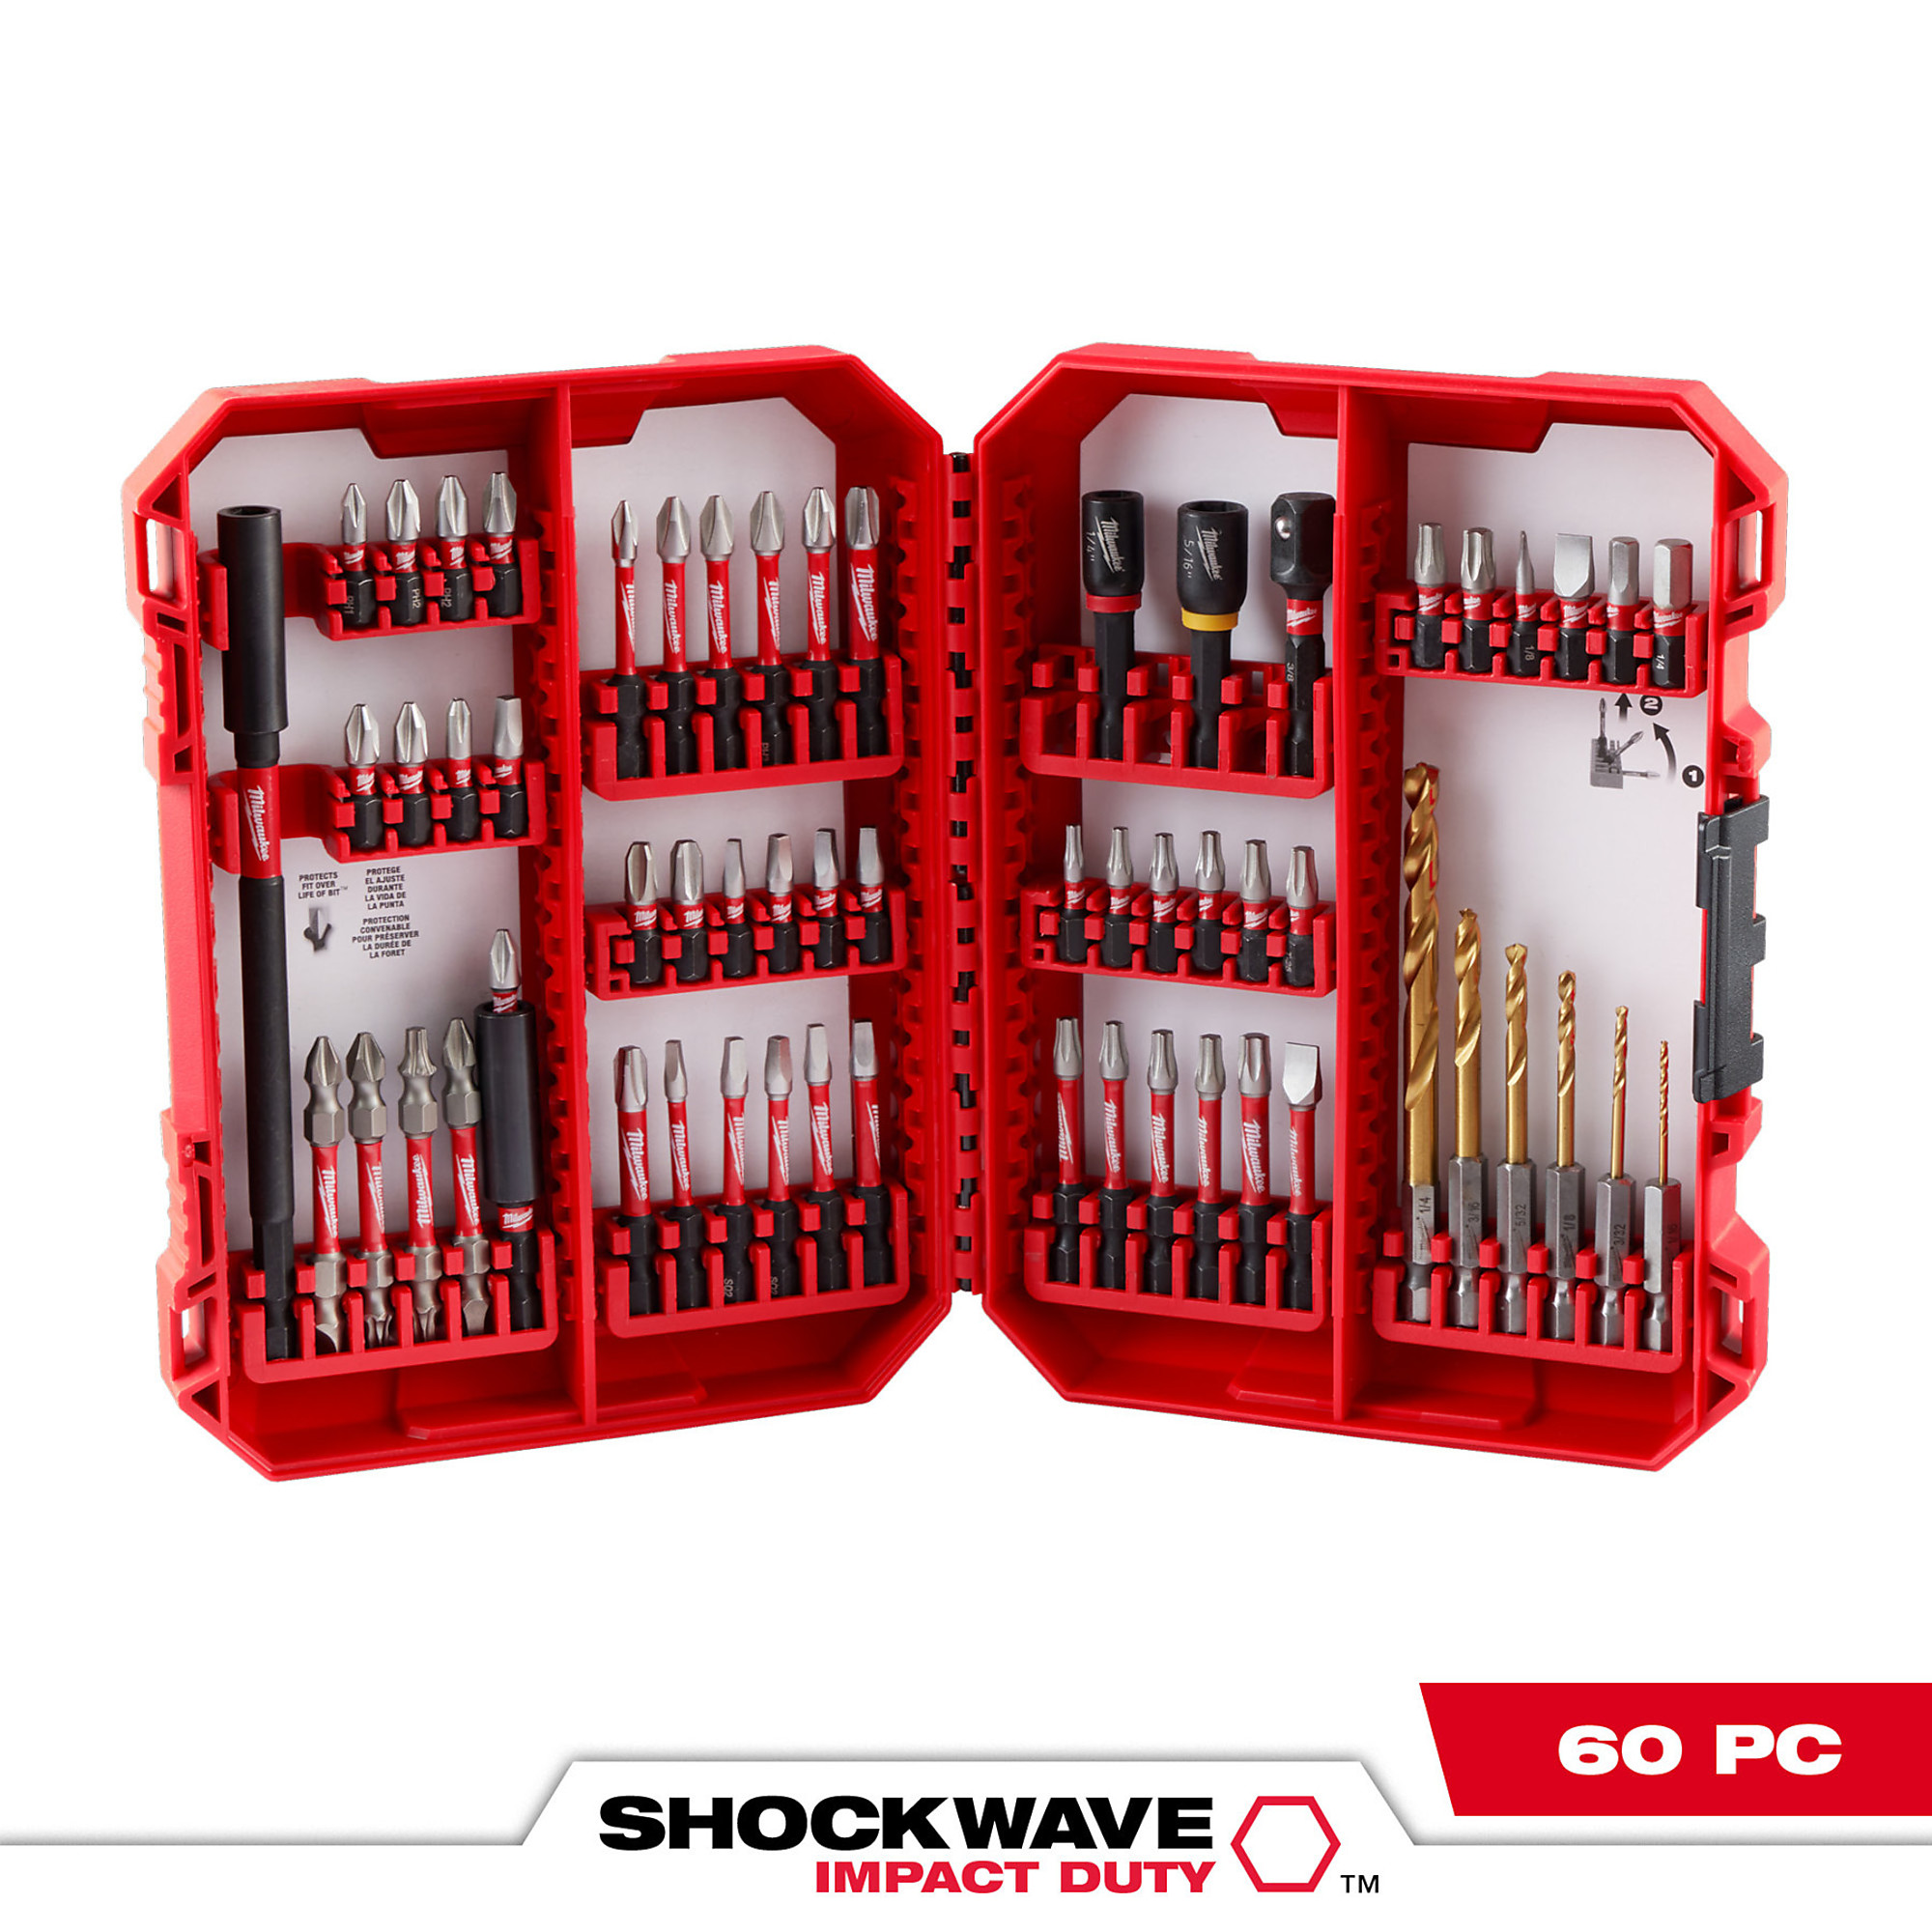 Milwaukee, SHOCKWAVE Impact Duty Drill Drive Set - 60PC, Included (qty.) 60 Model 48-32-4097